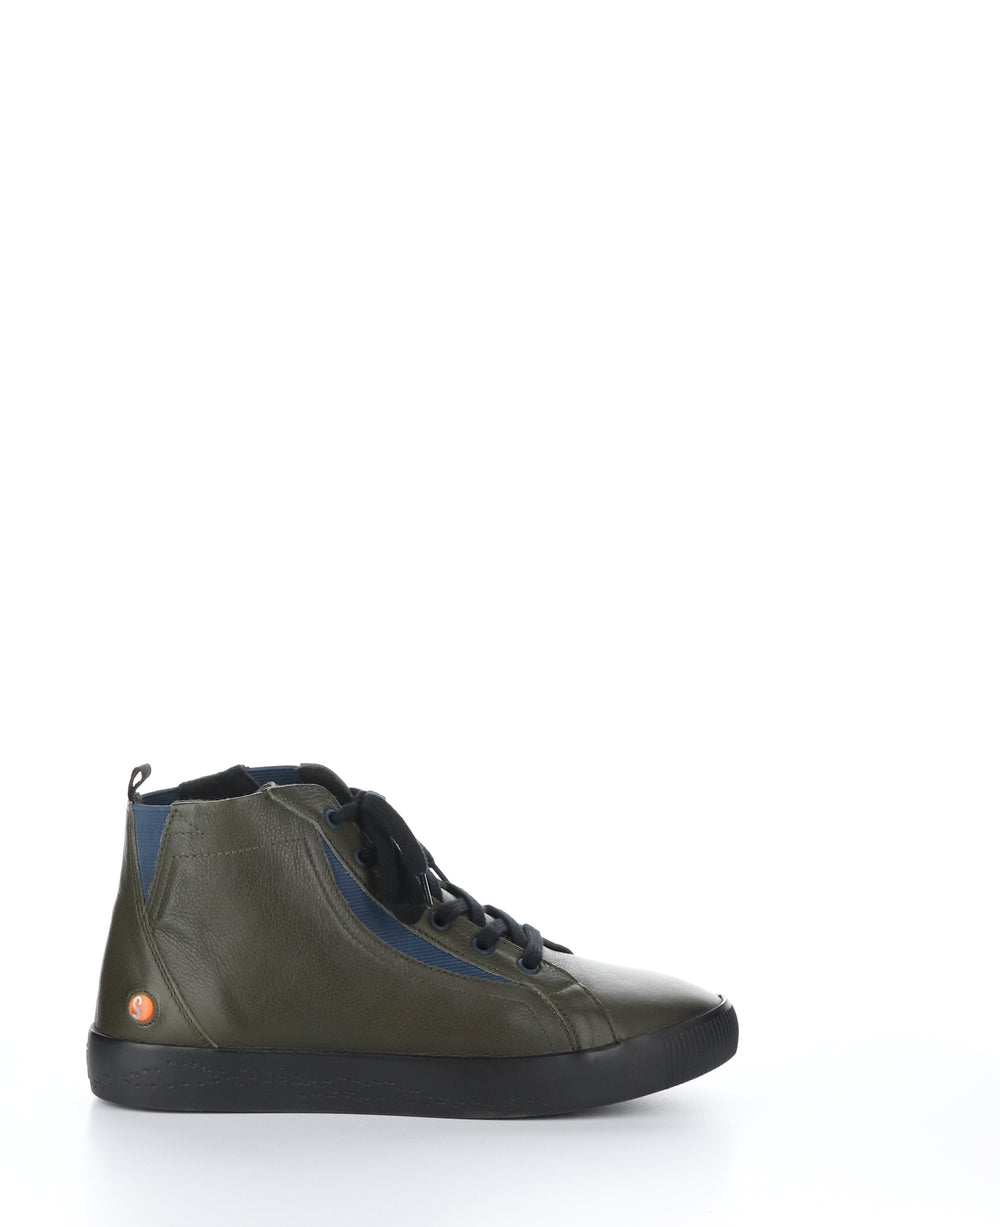 SHYL658SOF Army Round Toe Shoes|SHYL658SOF Chaussures à Bout Rond in Vert